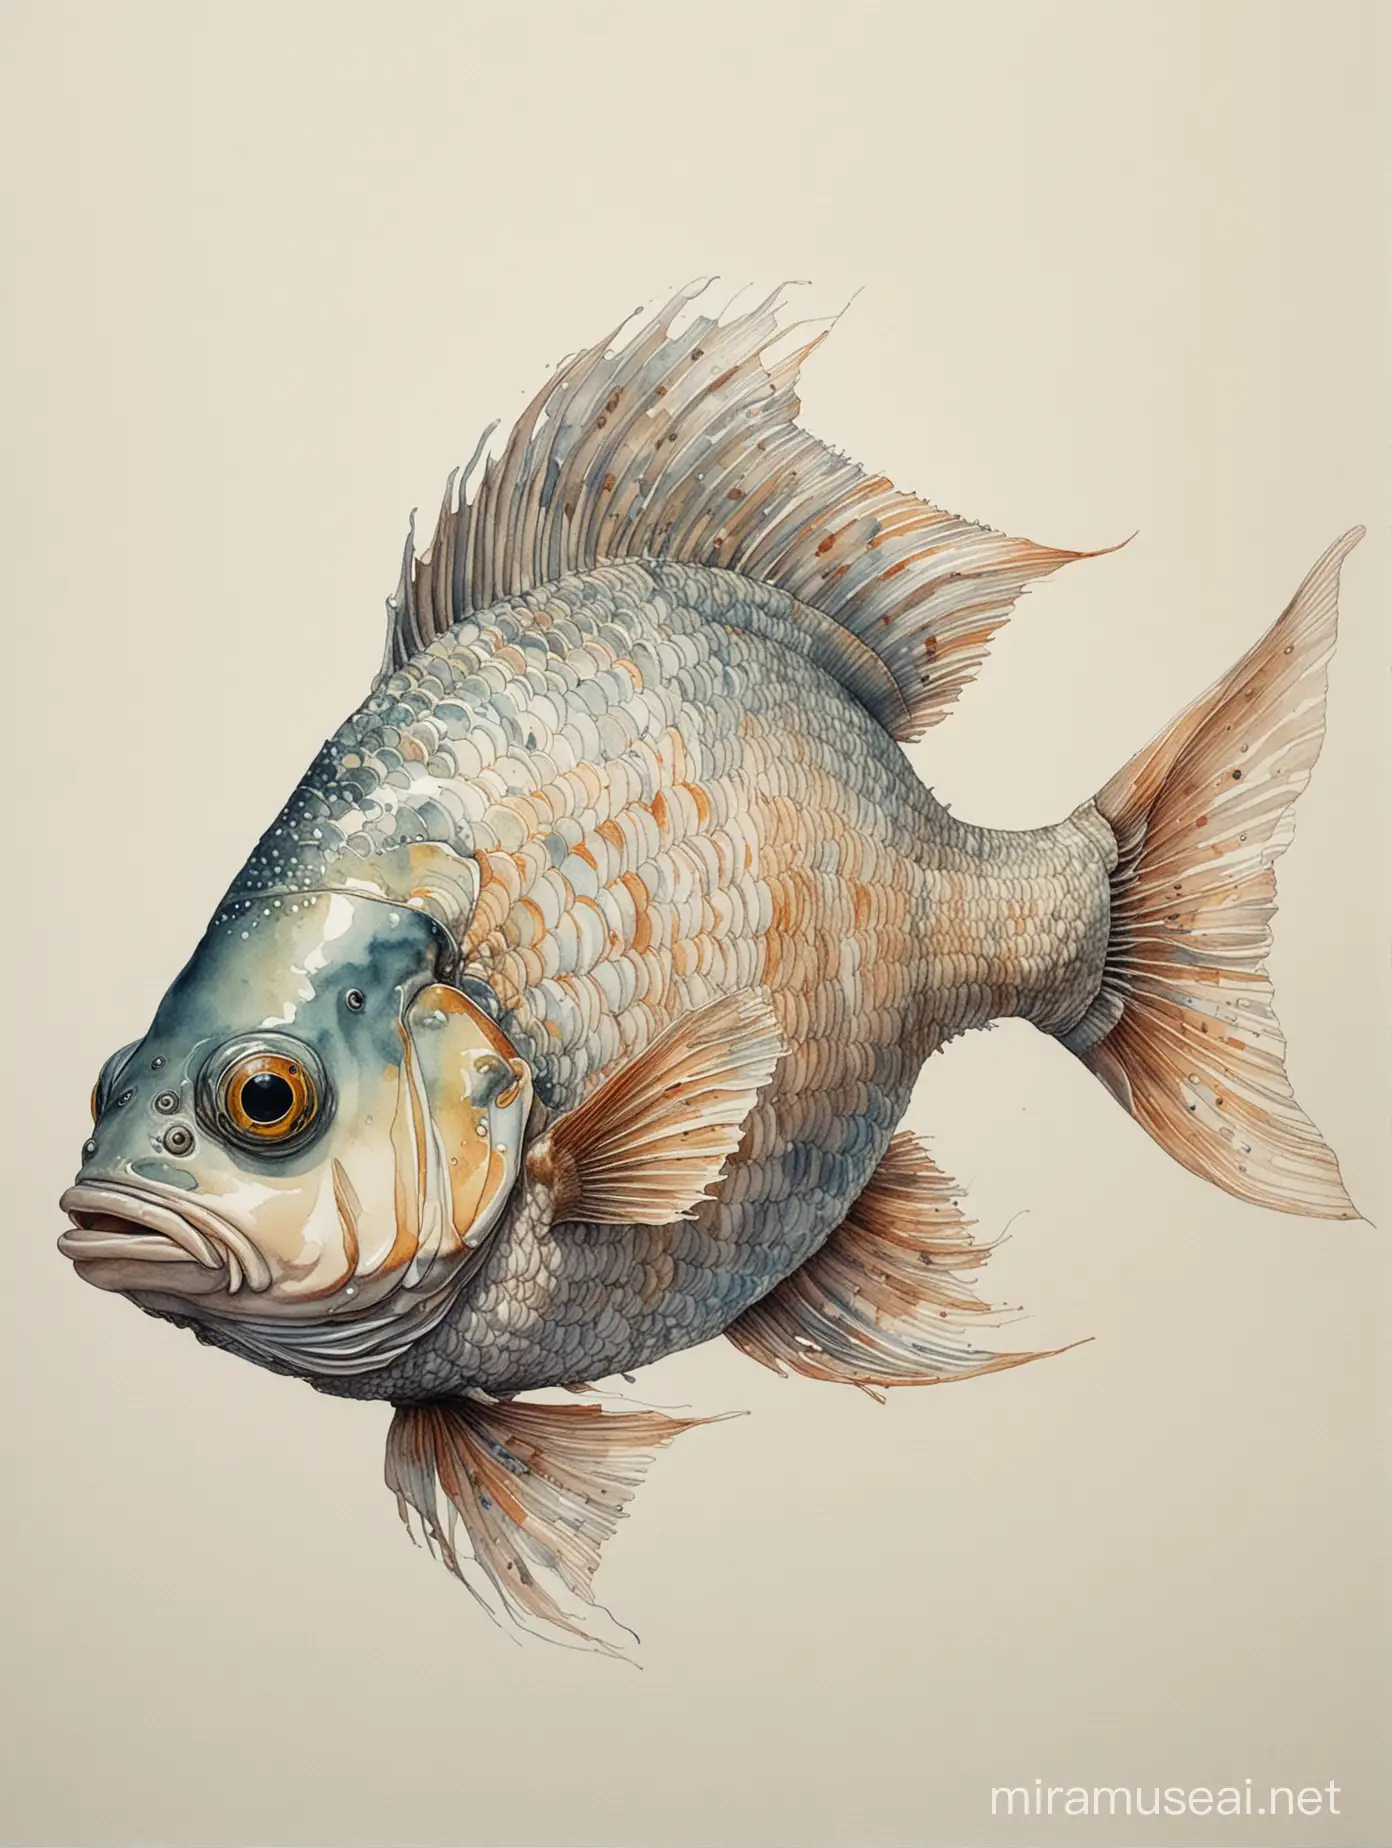 Detailed Technical Drawing of a Fish with Wheels Watercolor Rendering with Beautiful Shadows